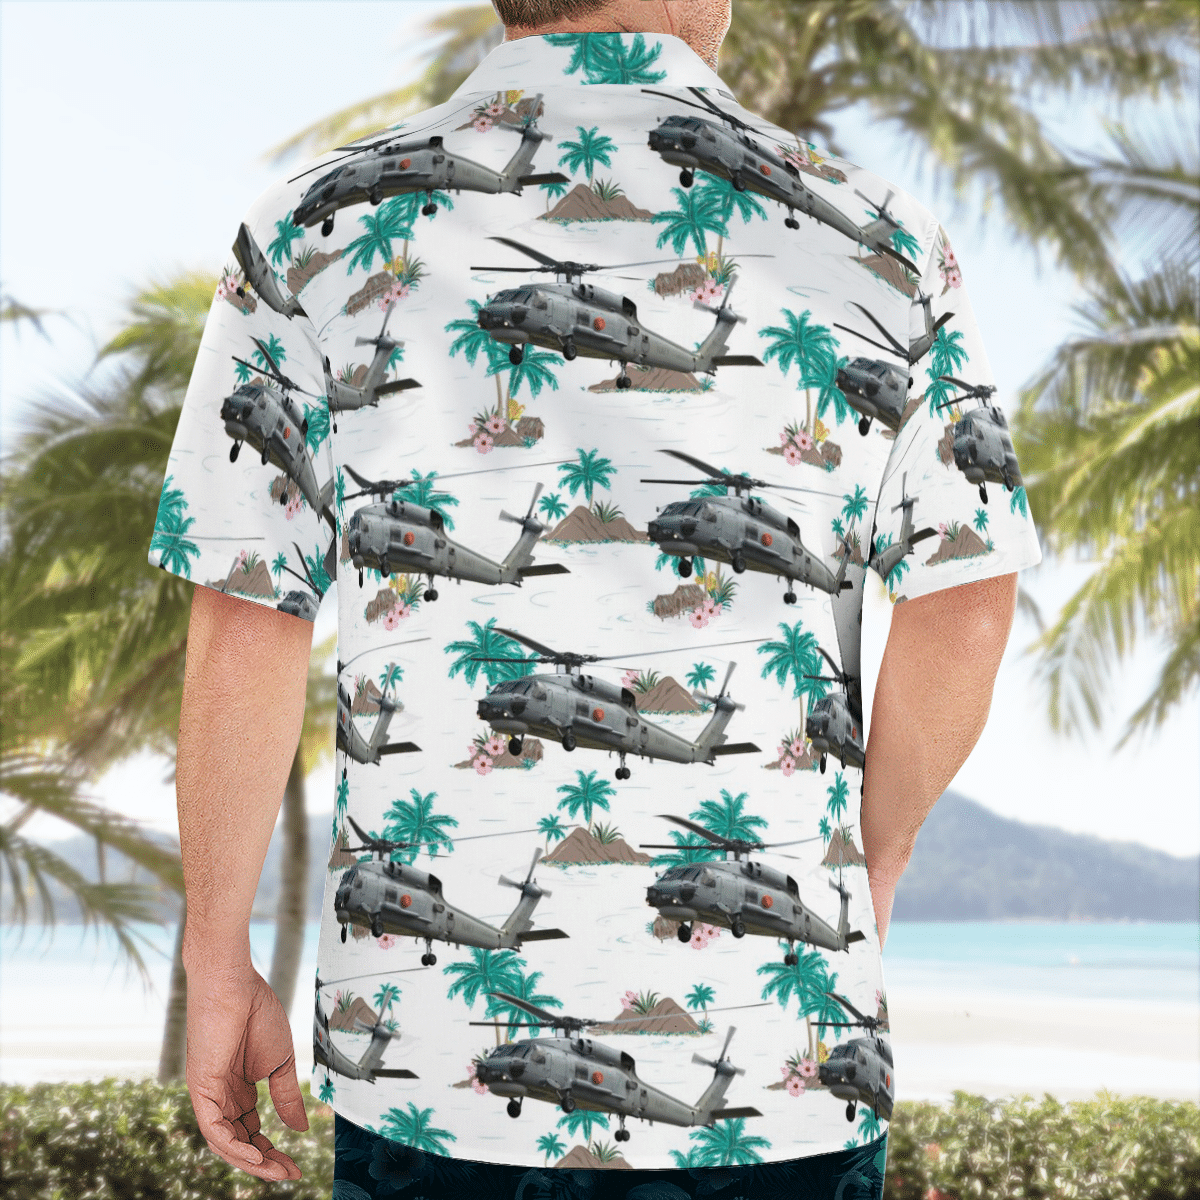 Top Hawaiian fashions that will give you a good look 20